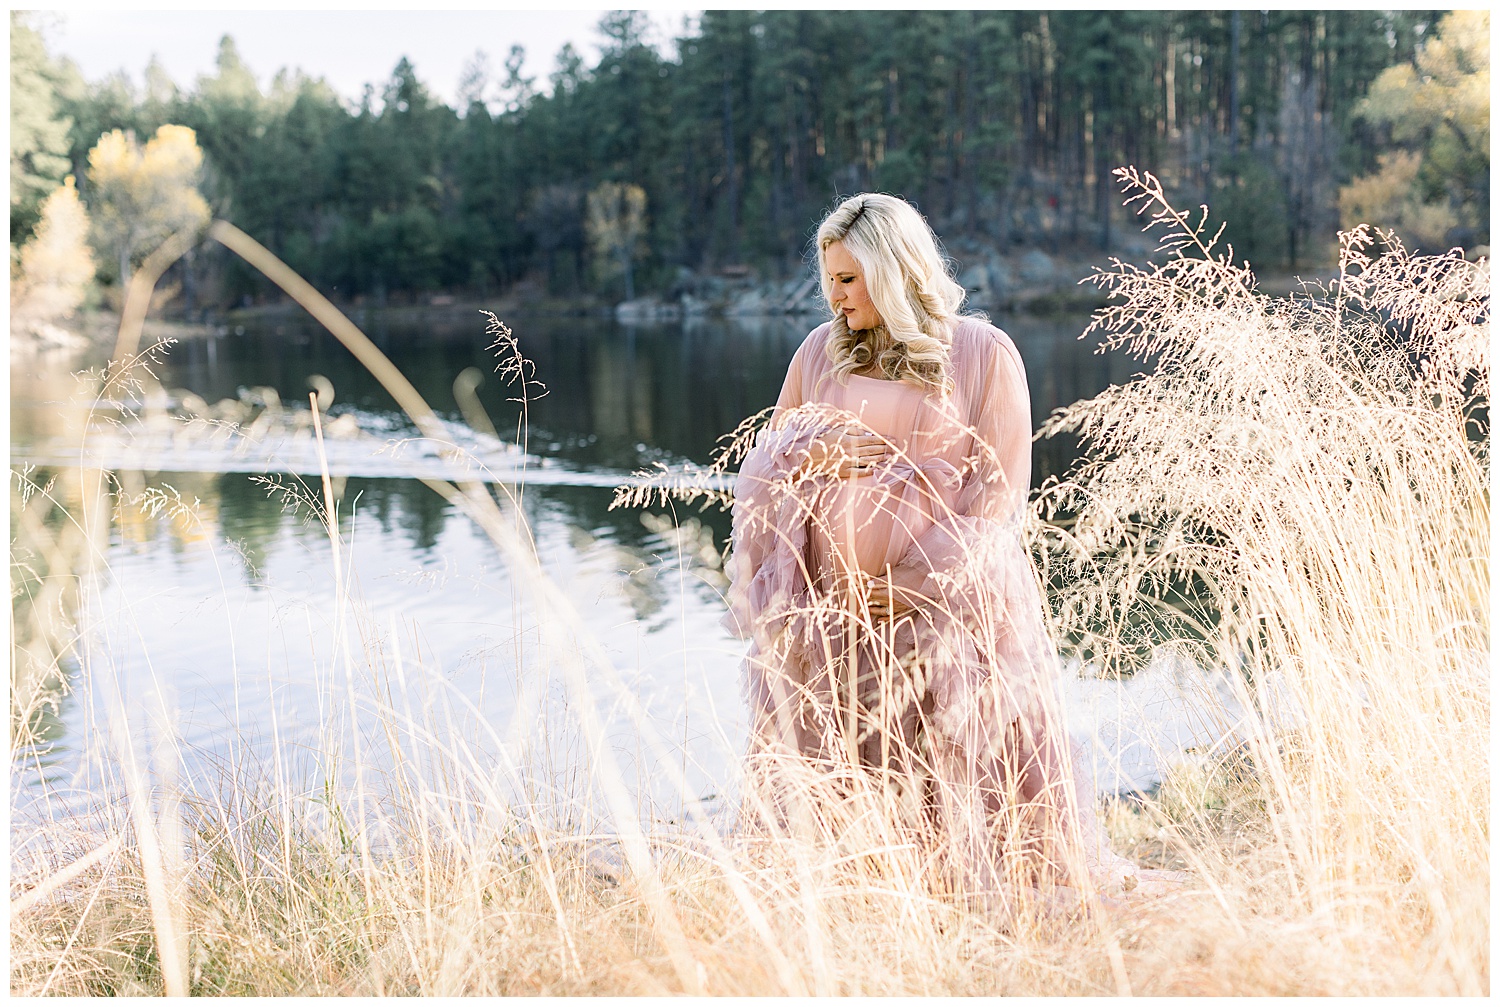 Lakeside Maternity Session in Prescott Arizona with blush gown